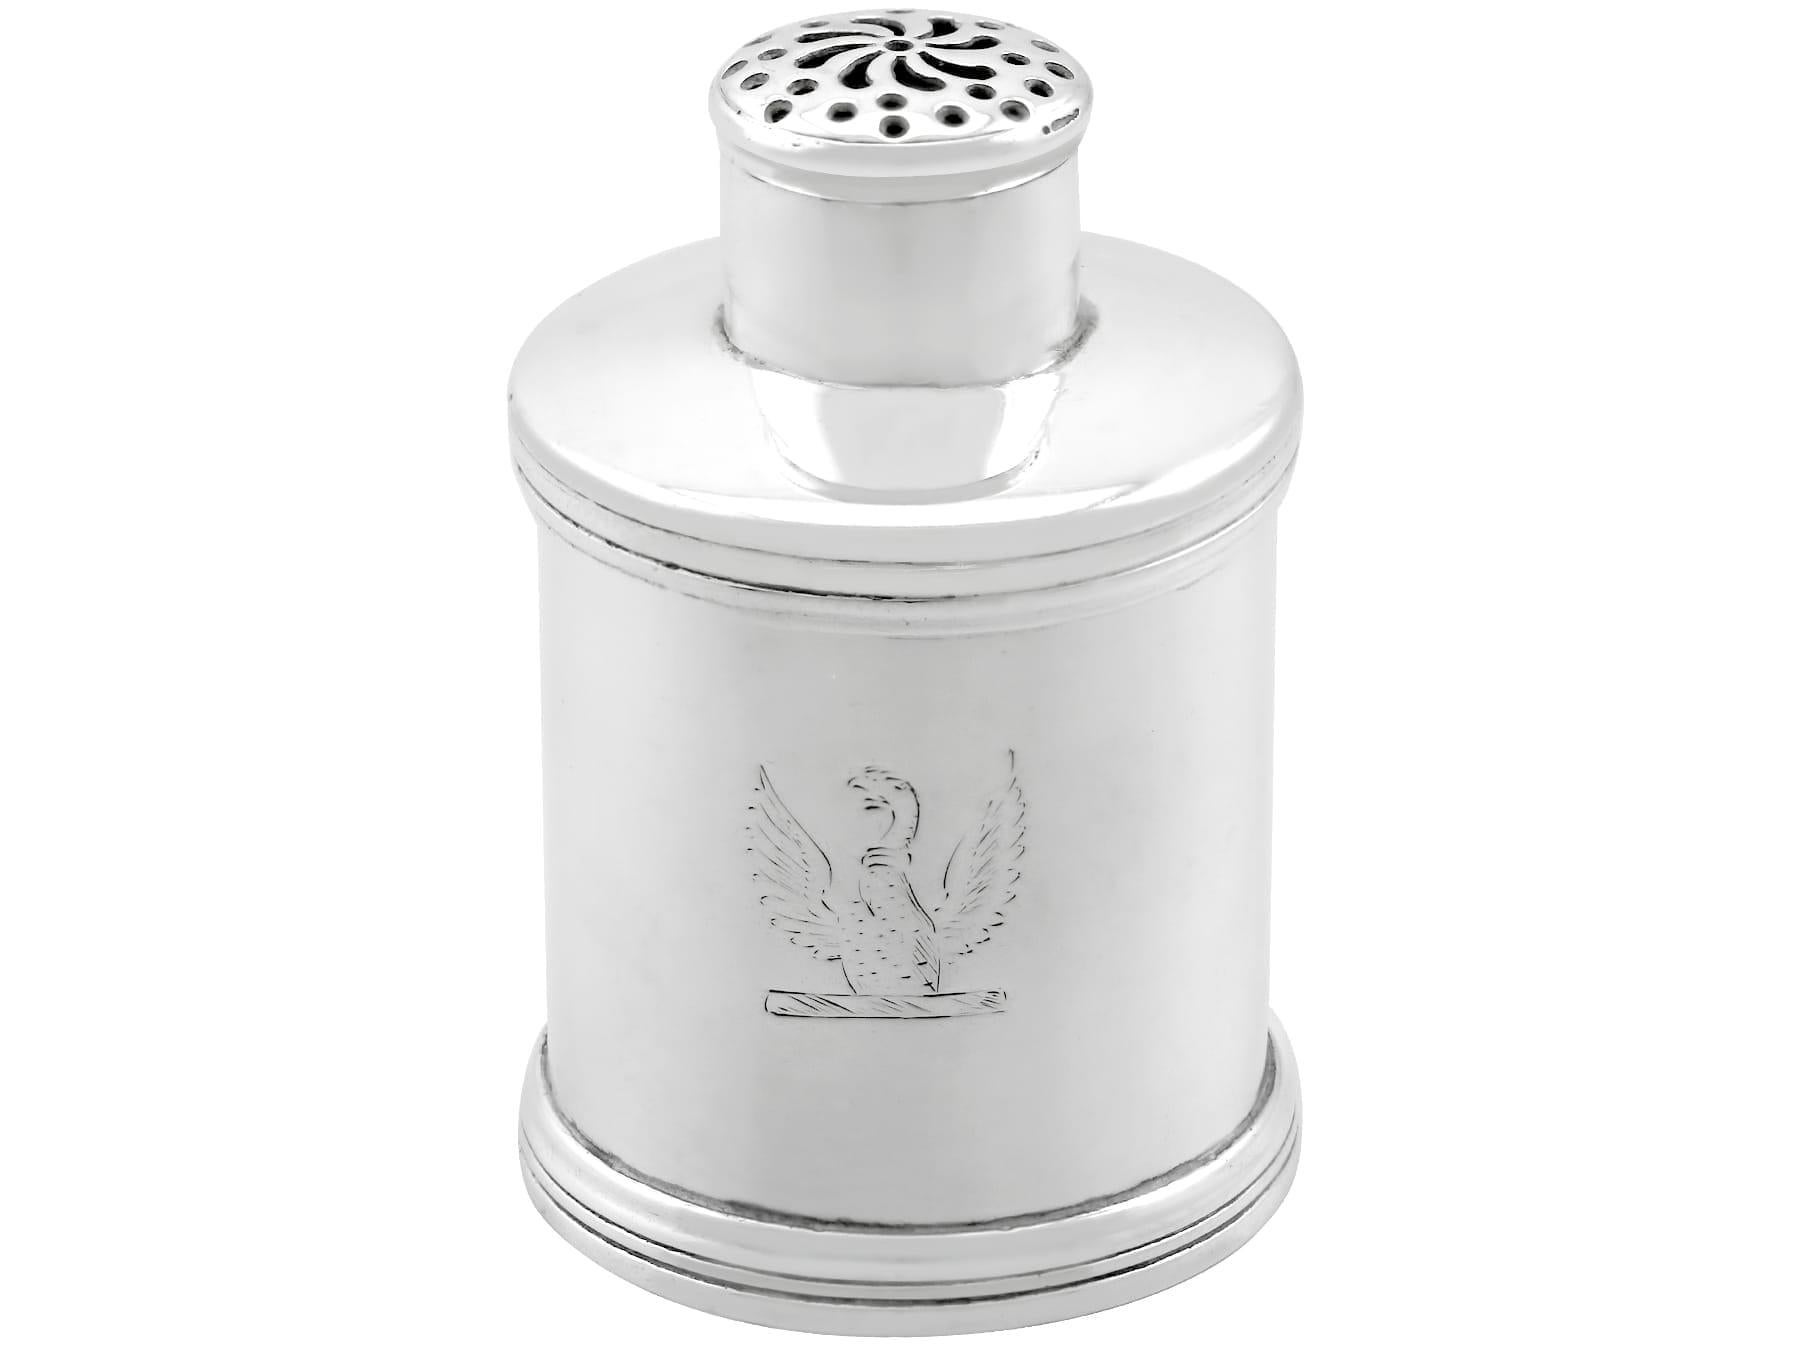 An exceptional, fine and impressive, rare antique Victorian Scottish sterling silver kitchen pepper; an addition to our Victorian silverware collection.

This exceptional and rare antique Victorian Scottish sterling silver kitchen pepper has a plain